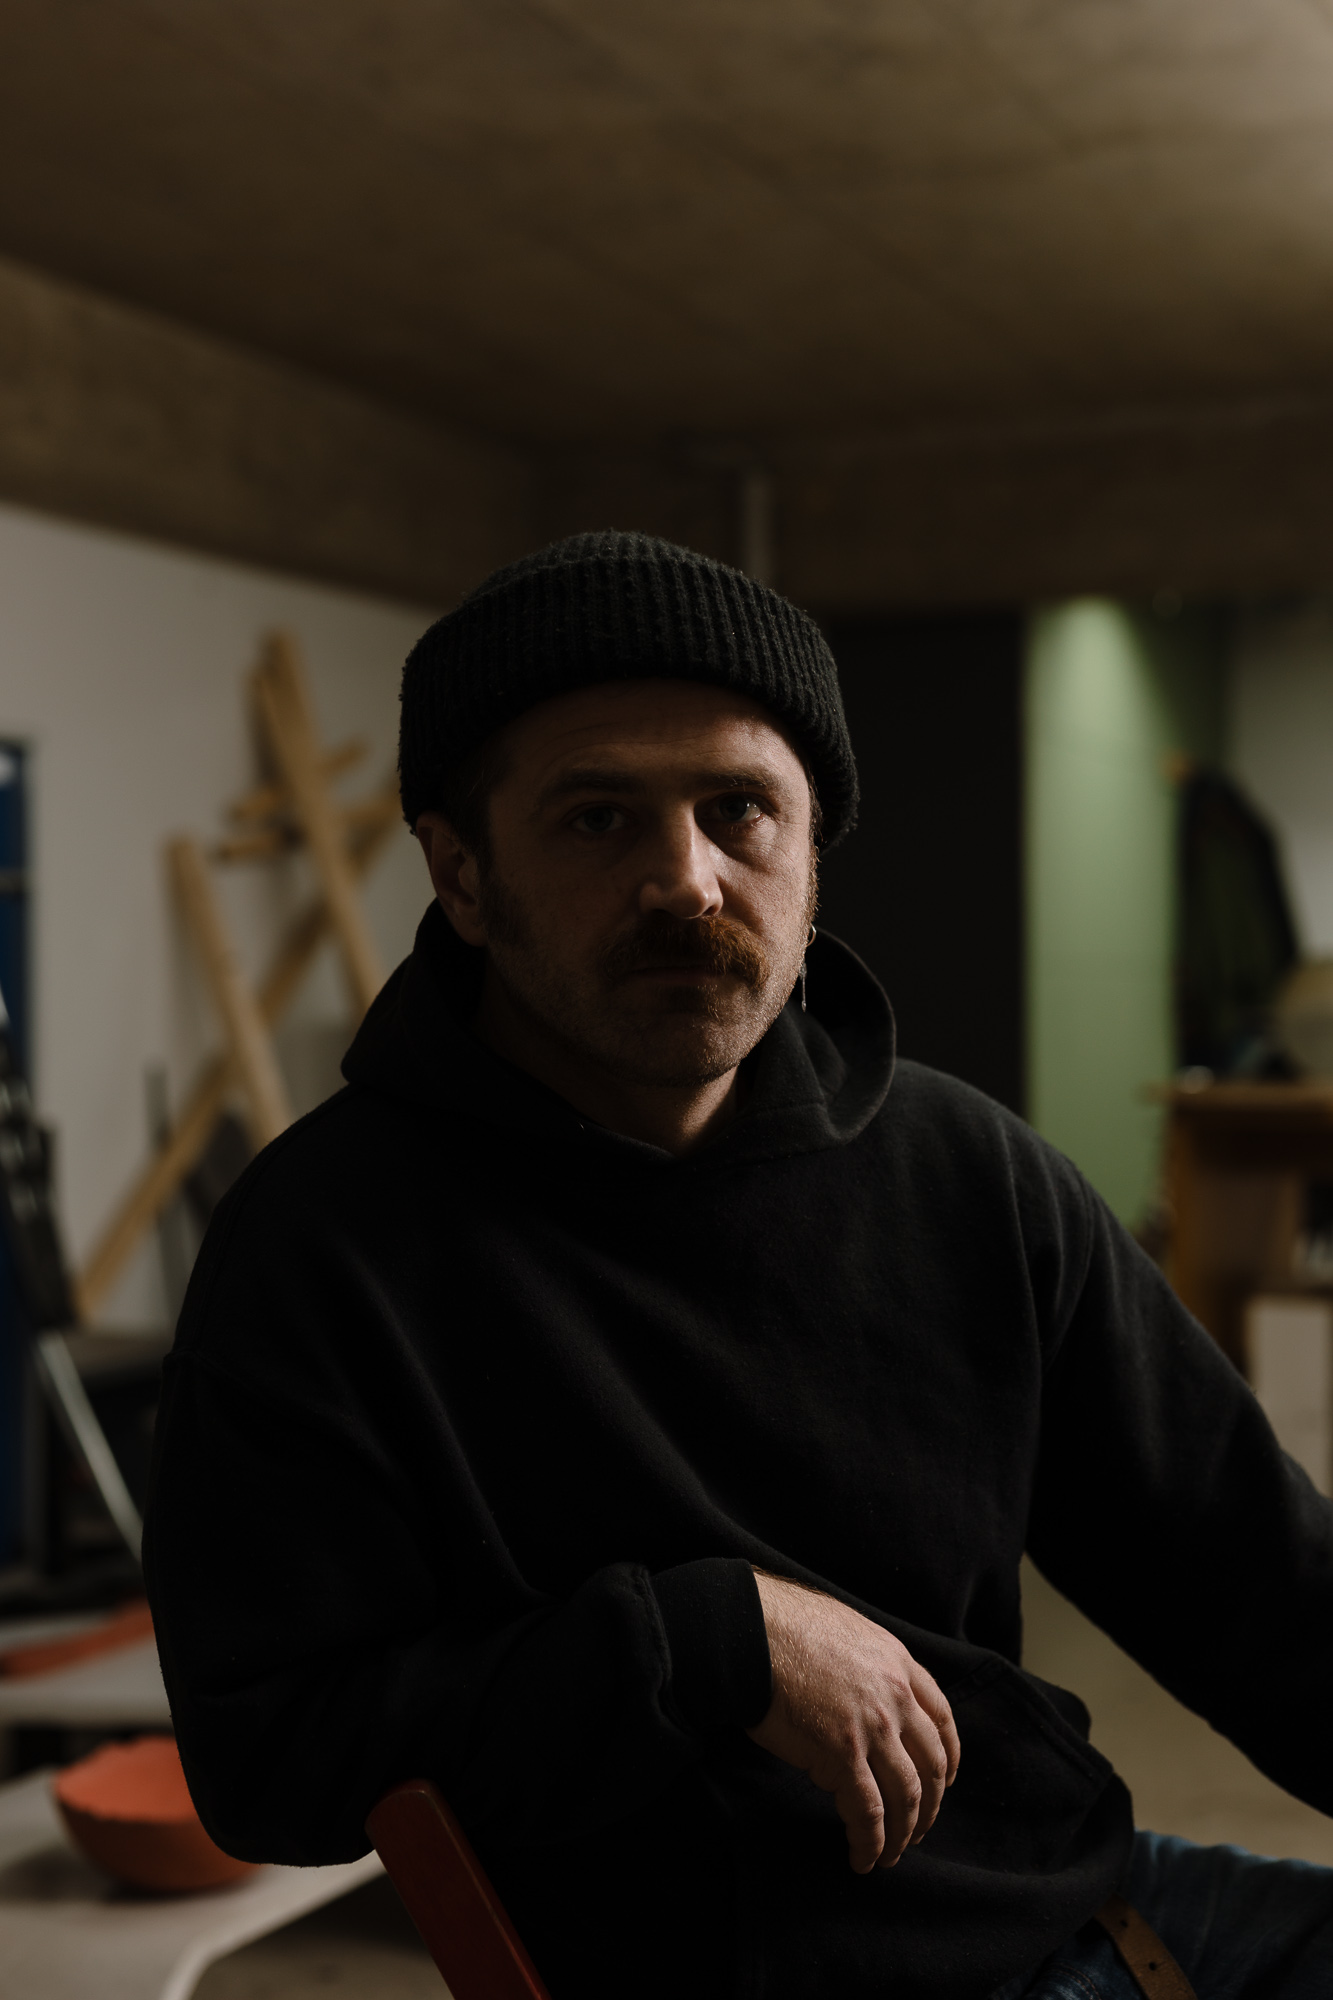 Vato – Founder and craftsman from Clasik Studio